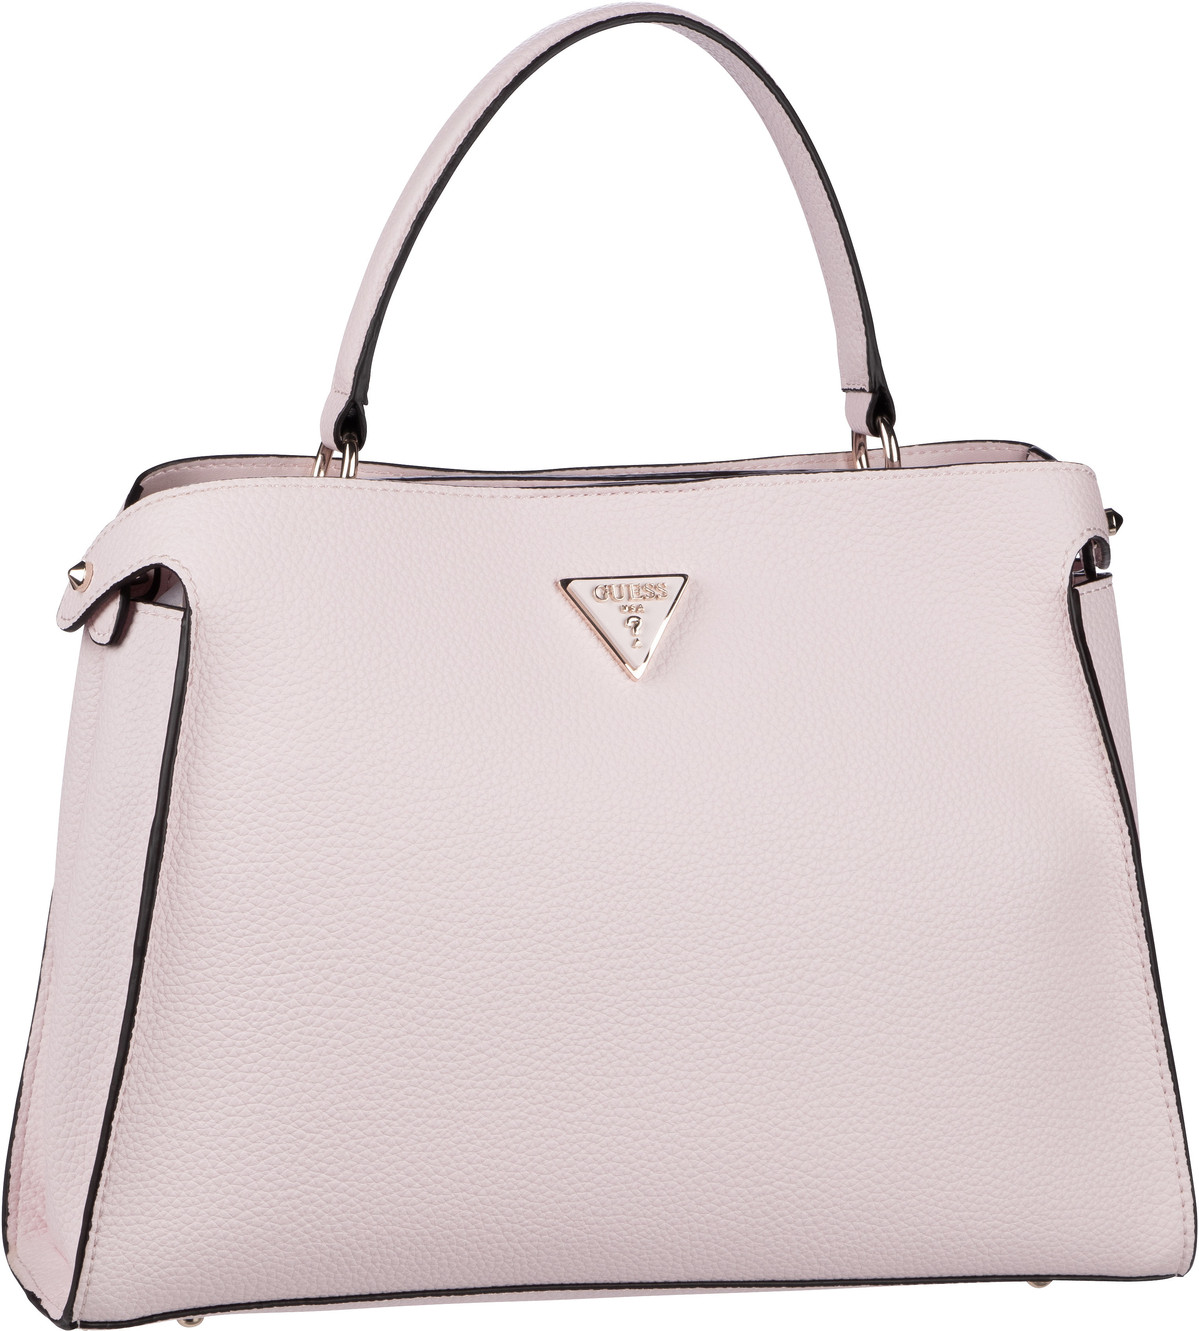 Guess Downtown Chic Large Turnlock Satchel - Powder Pink